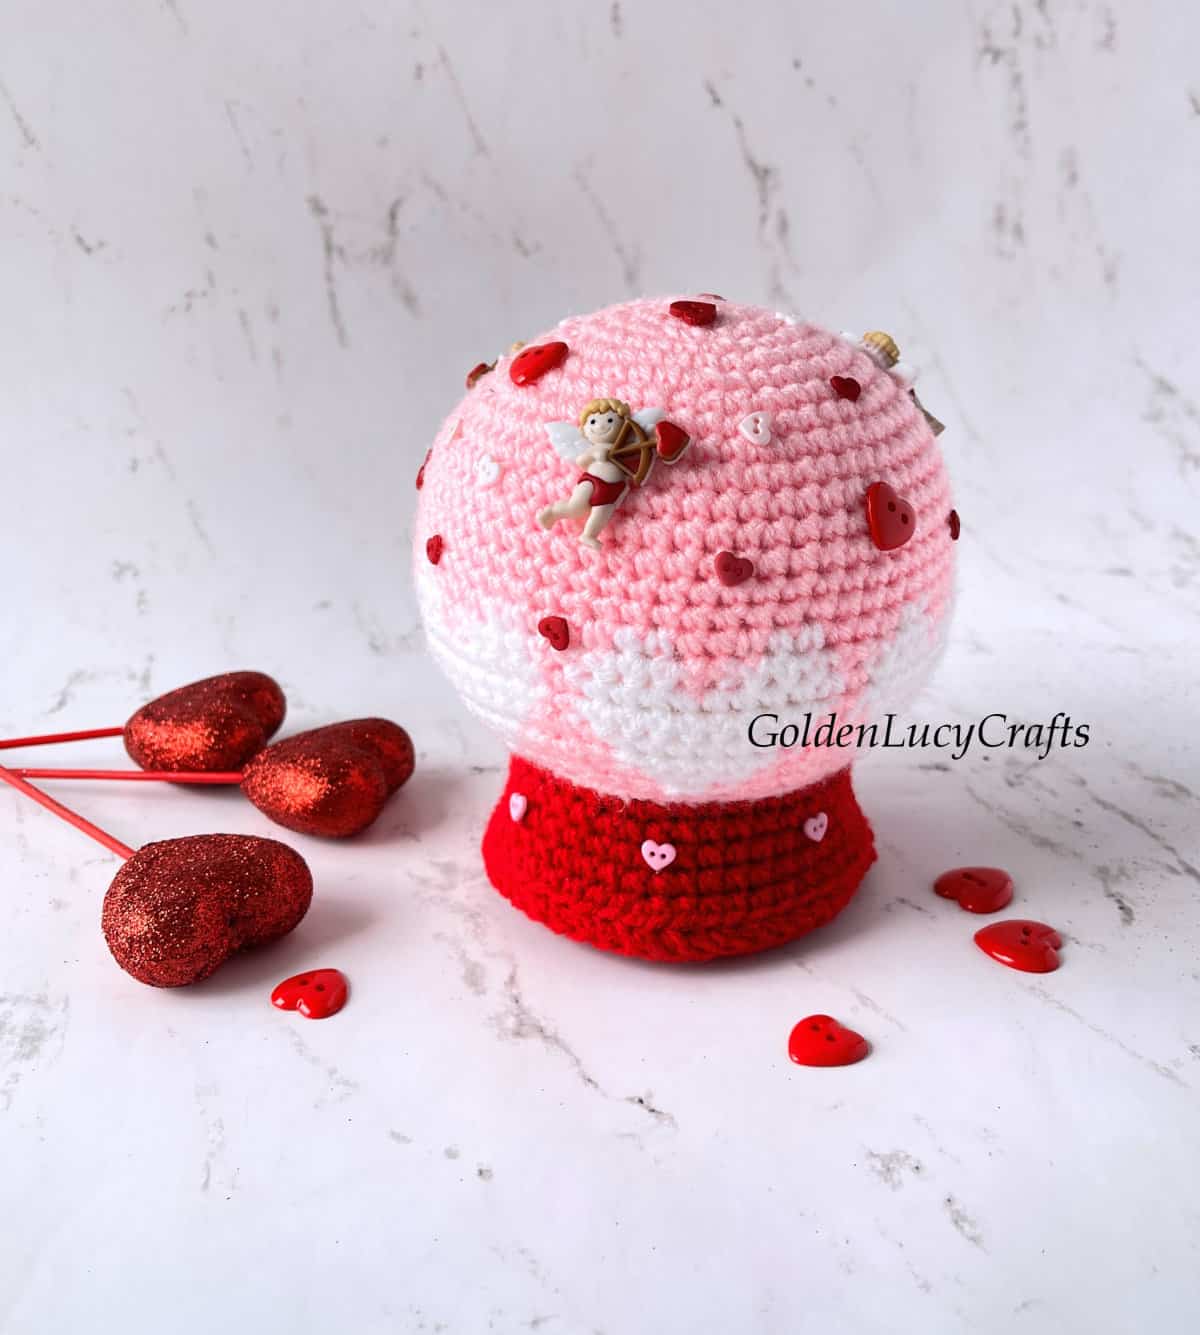 Crocheted snow globe Valentine's Day snow globe embellished with decorative buttons.